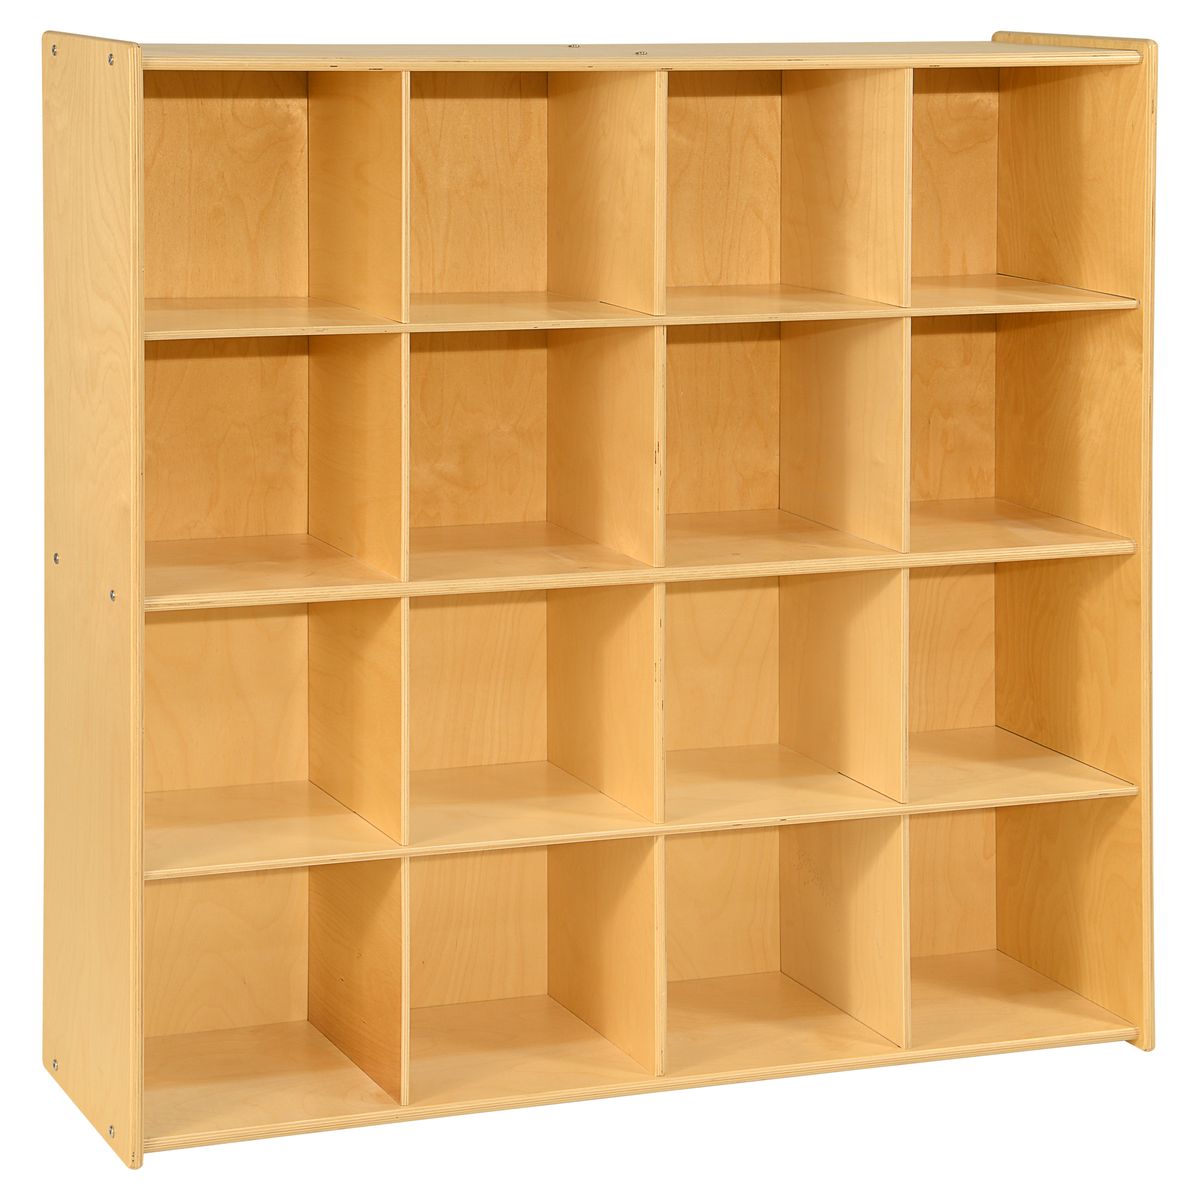 Picture of Contender C50916 Big Cubby Storage with 16 Cubbies - RTA